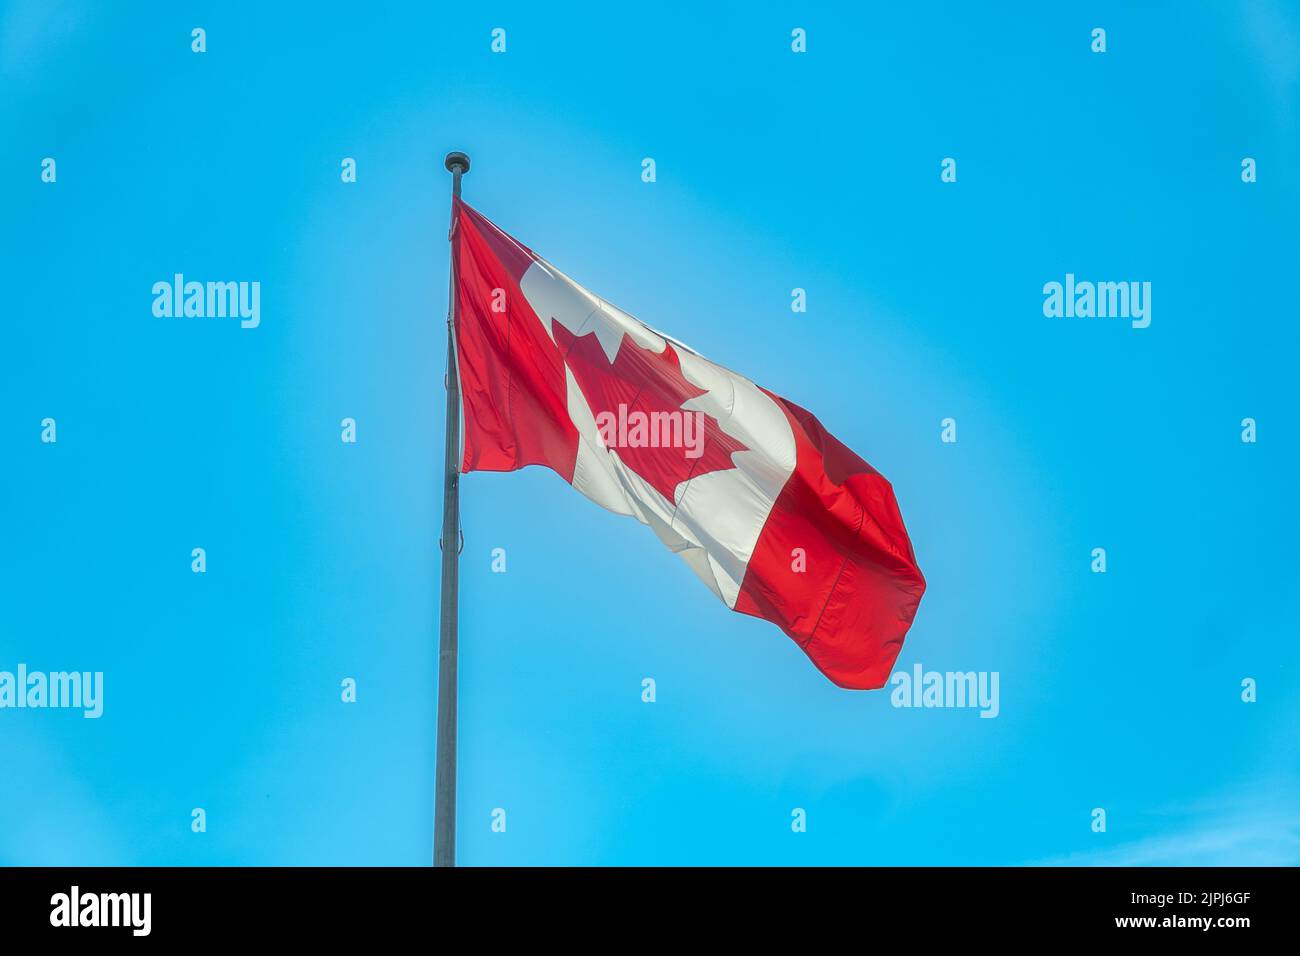 A large Canadian flag waving in the wind agaist a bright blue sky on a summer day Stock Photo